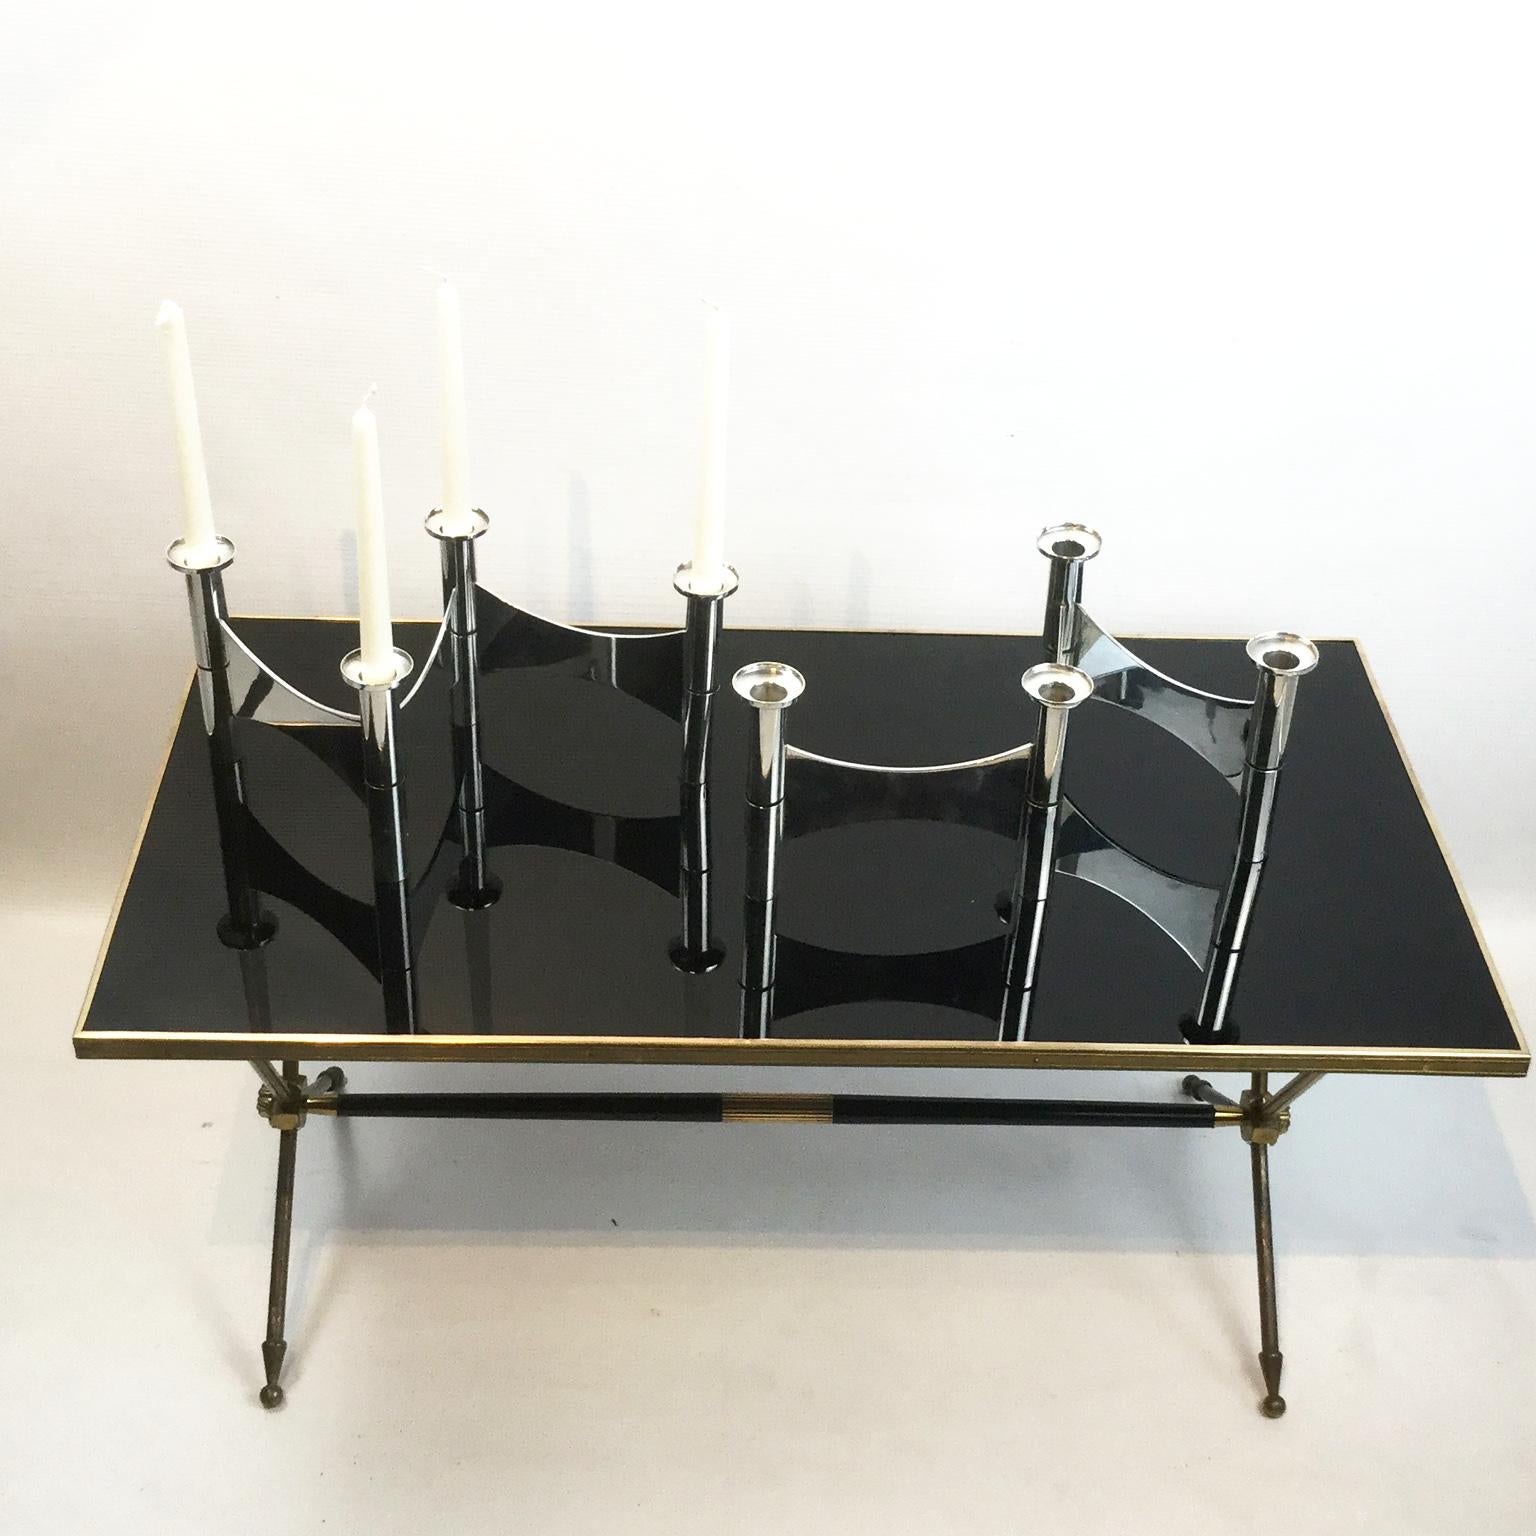 Late 20th Century Pair of Ravinet d'Enfert Silver Plated Candleholders by Roger Tallon 1970s